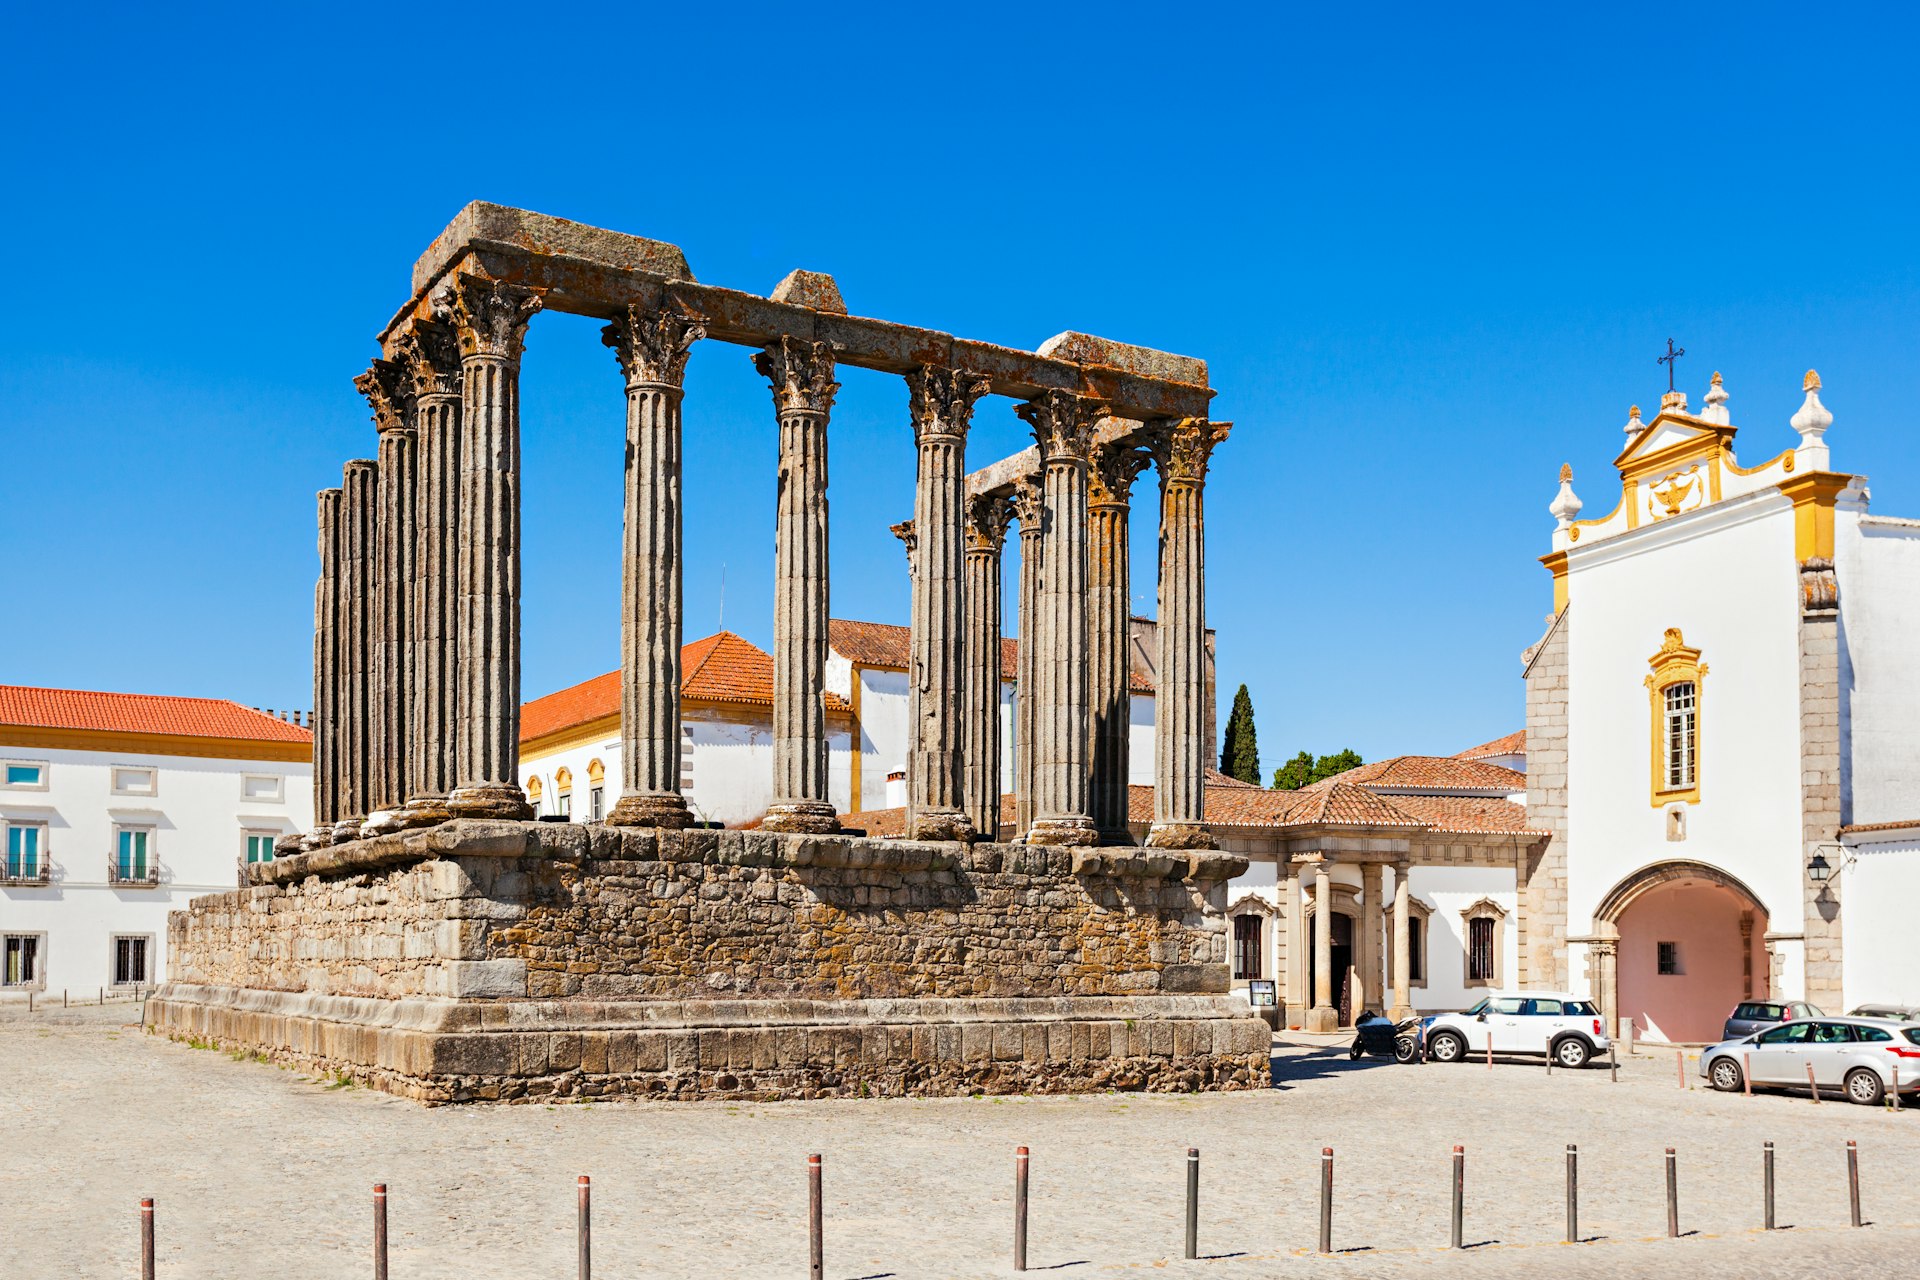 A large columned Roman structure stands in the center of a town square